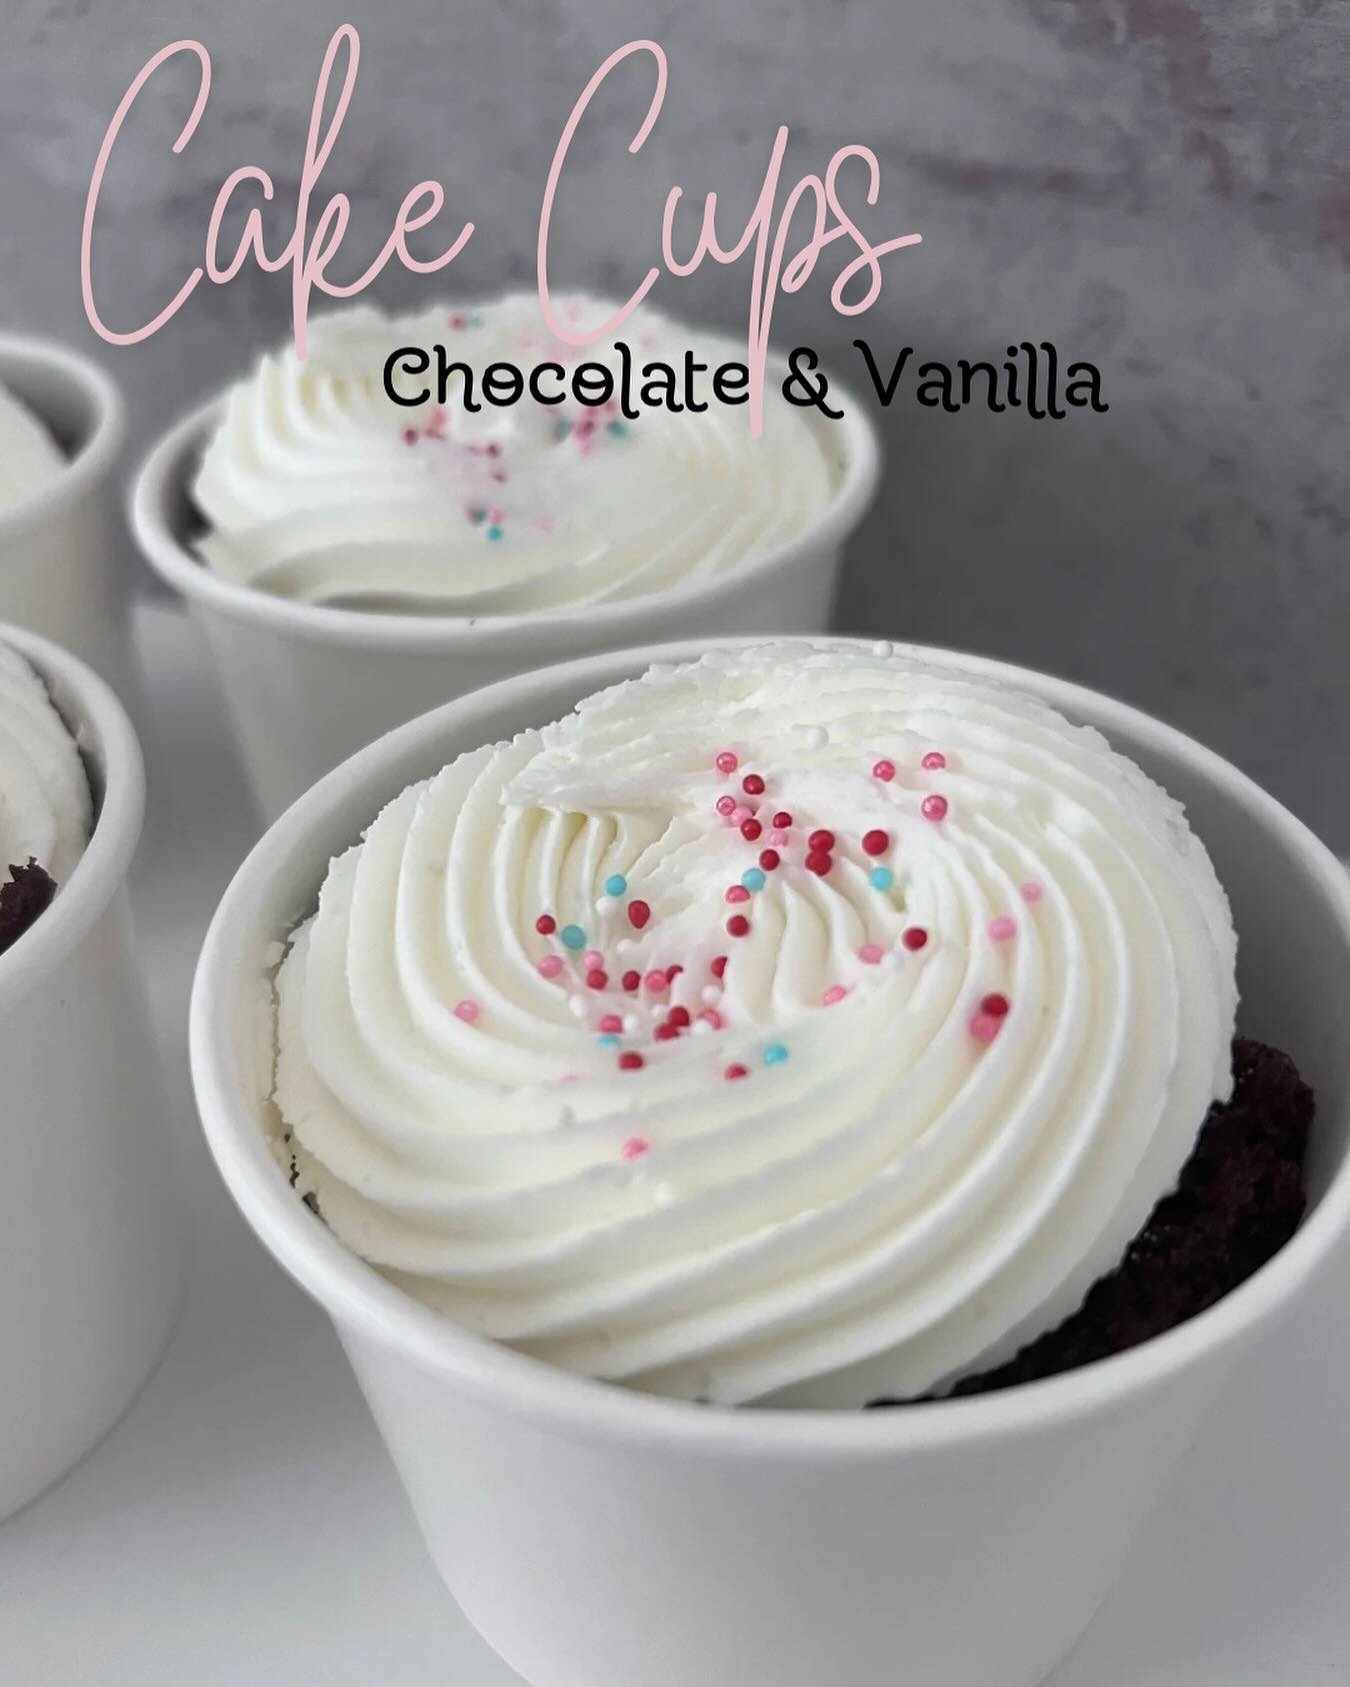 ✨New Product✨ Cake Cups are filled to the brim with irresistible chocolate or vanilla cake scraps and topped with creamy vanilla buttercream. 

🍰Available for pickup this week:
6- Vanilla 
6- Chocolate 

$6 each. Pickup today or tomorrow. Message me